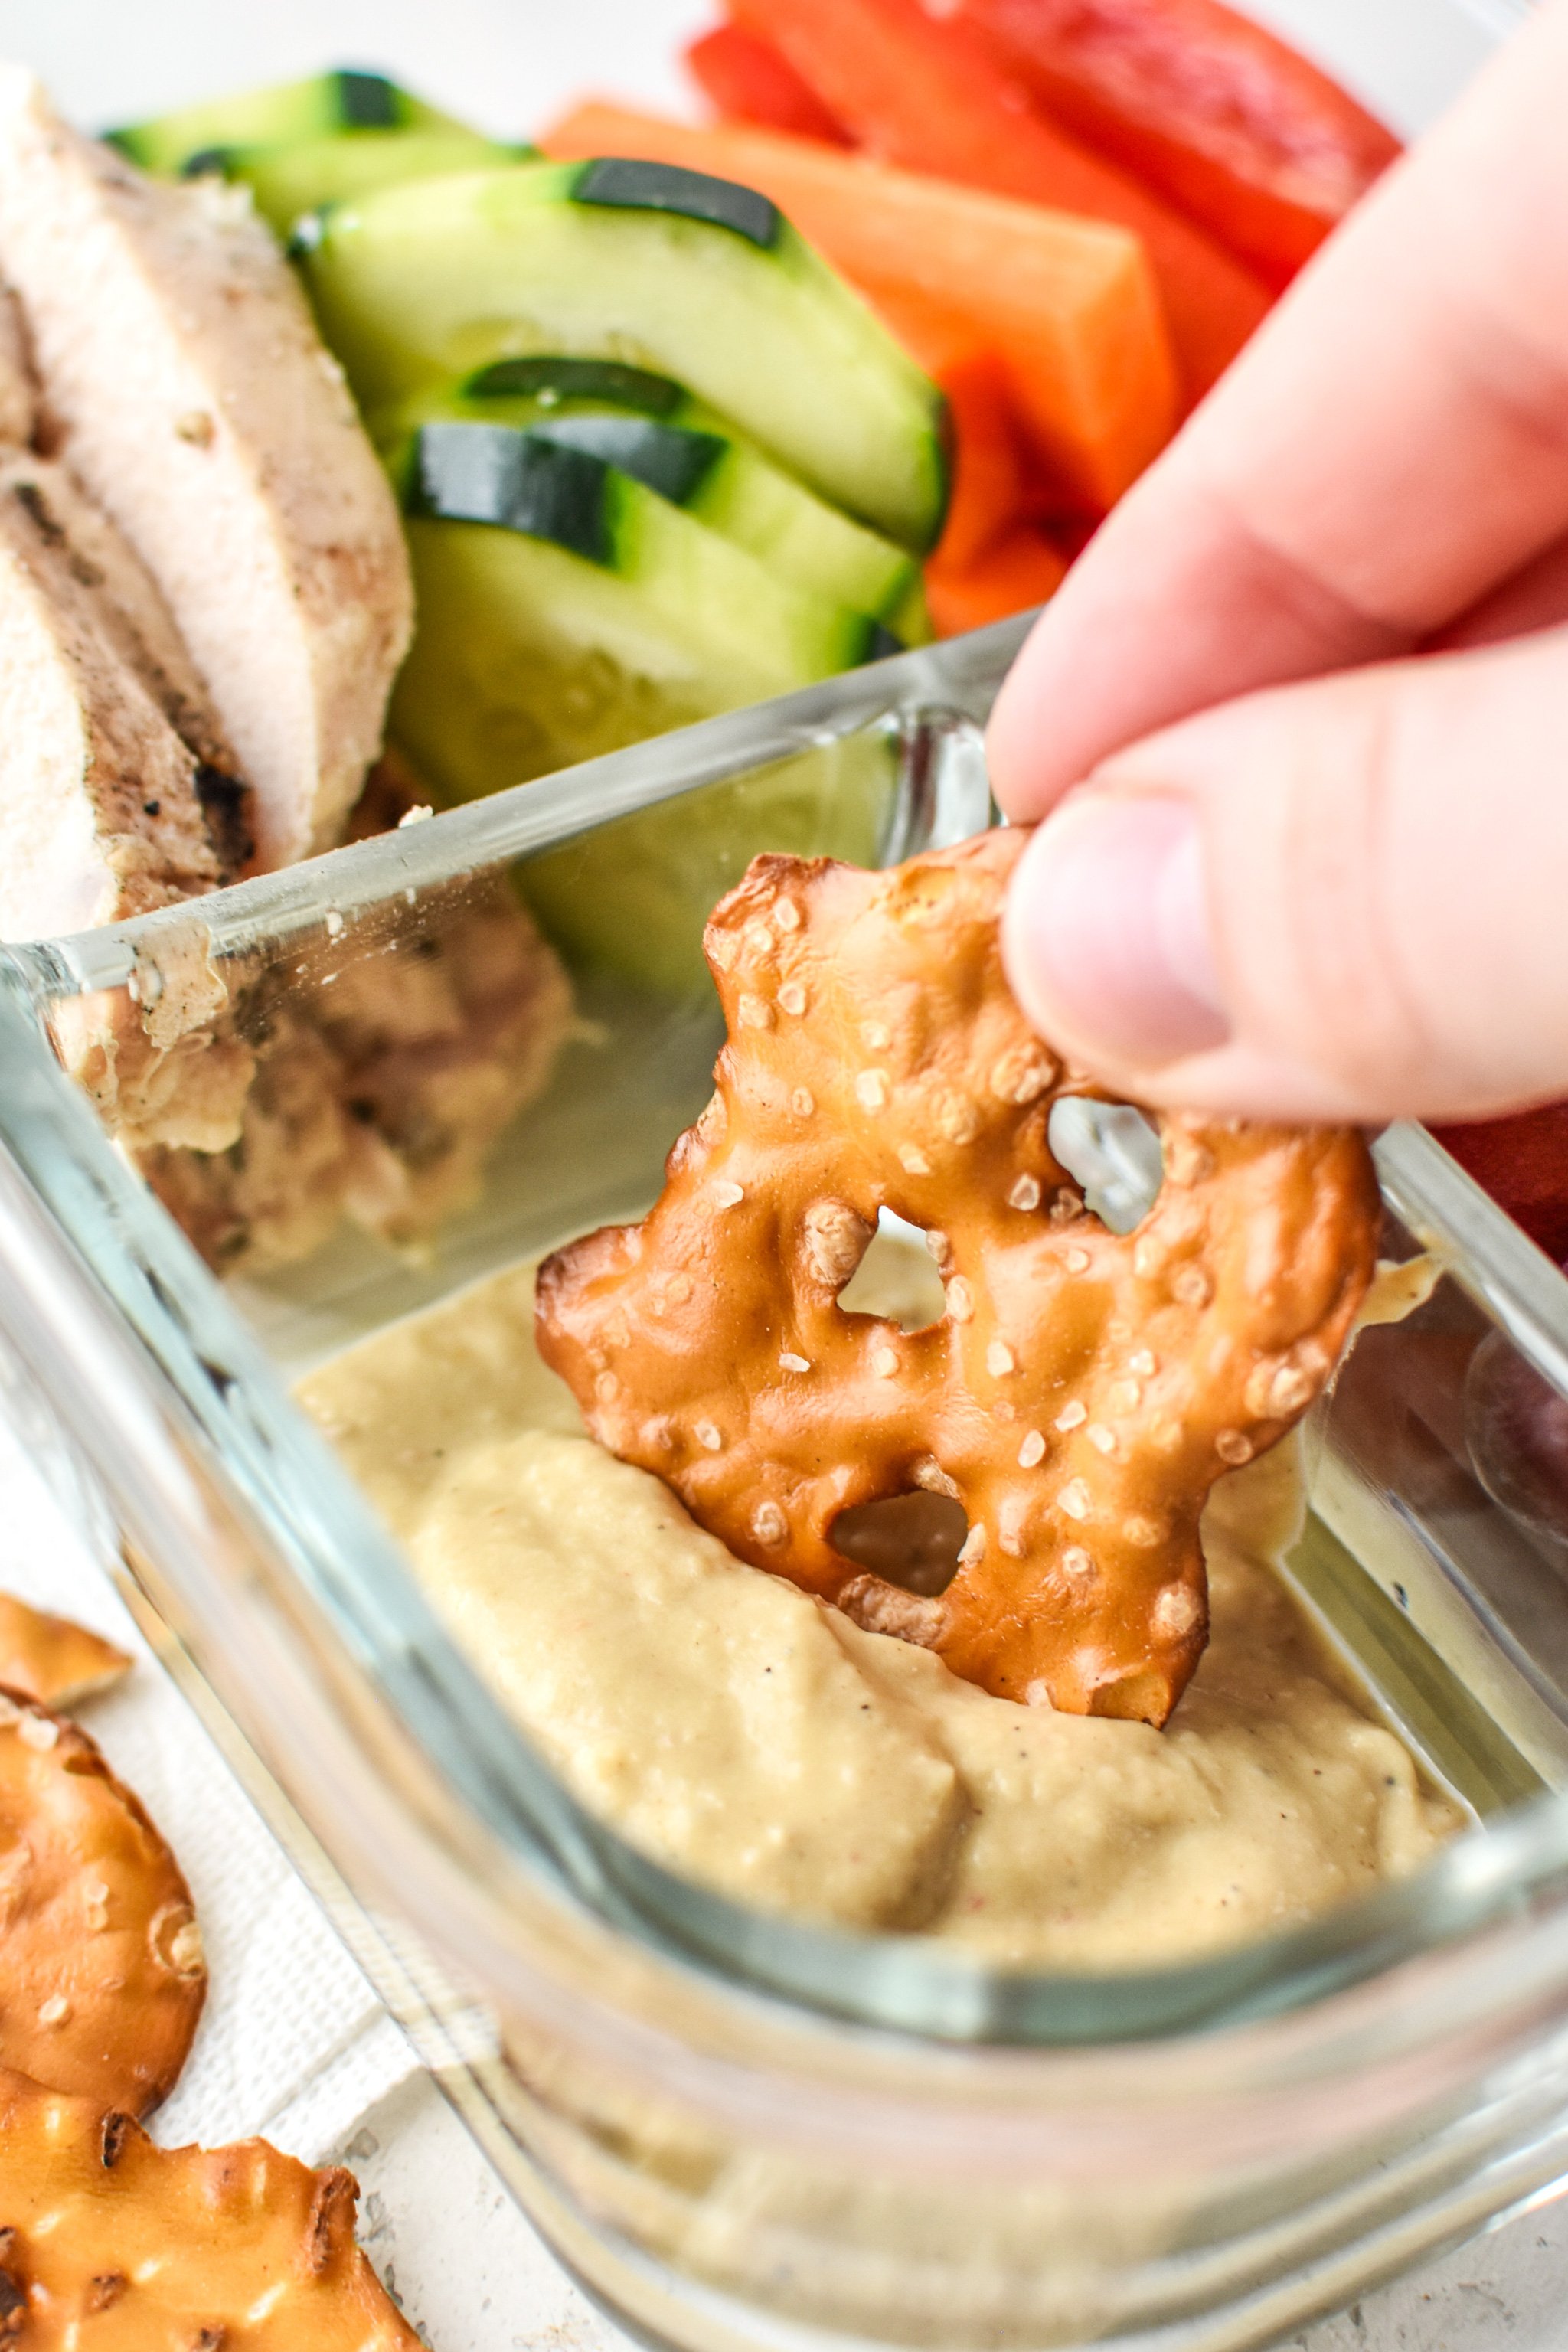 Dipping a pretzel into the hummus of the Chicken & Hummus Plate Lunch Meal Prep.